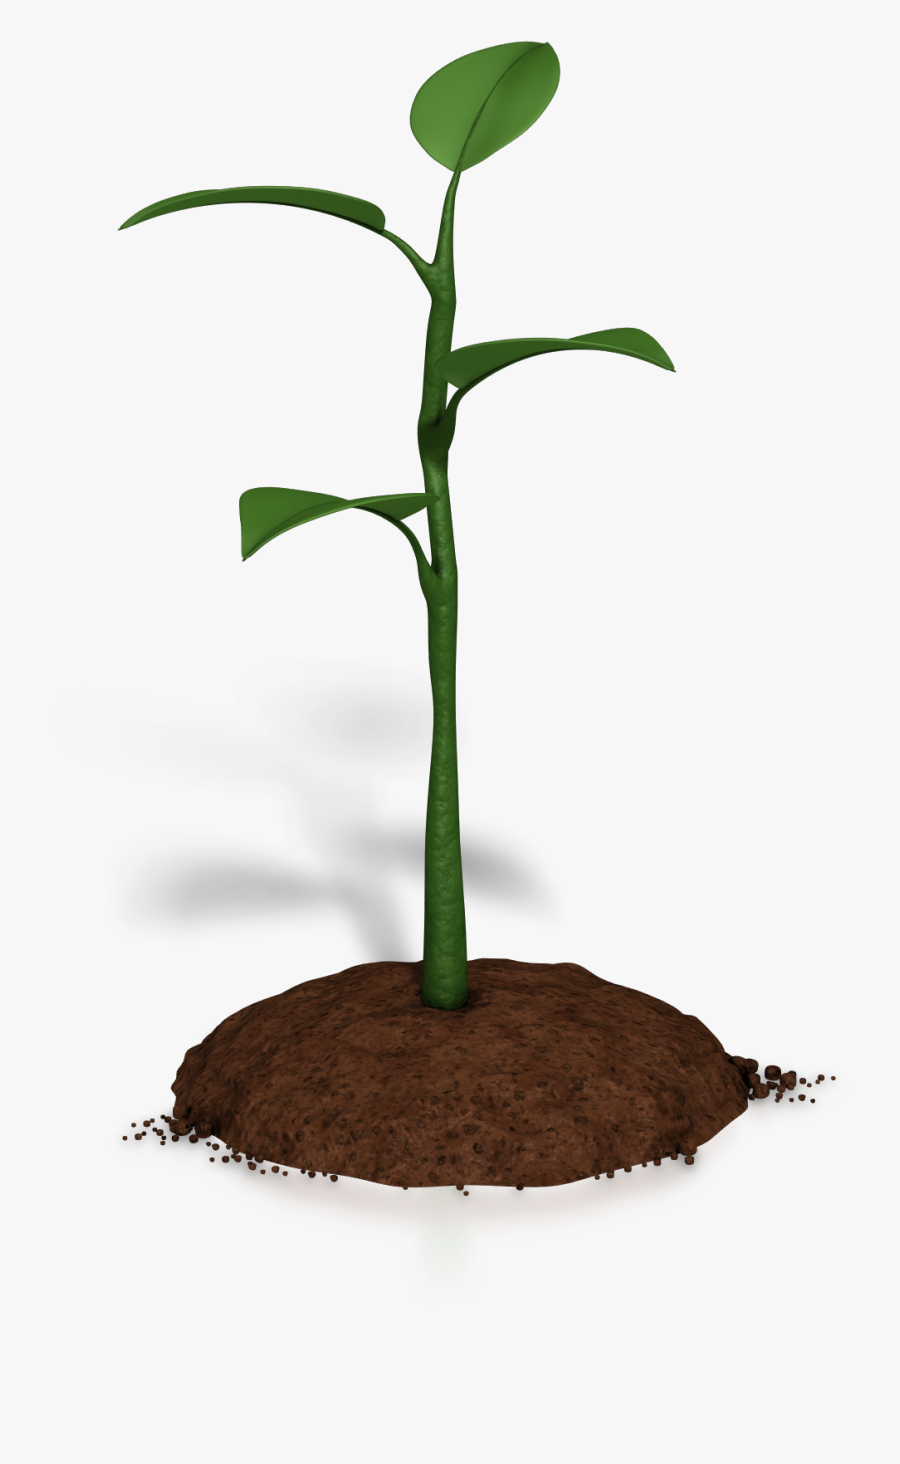 Soil Clipart Plant Growth - Without Continual Growth And Progress Such Words, Transparent Clipart